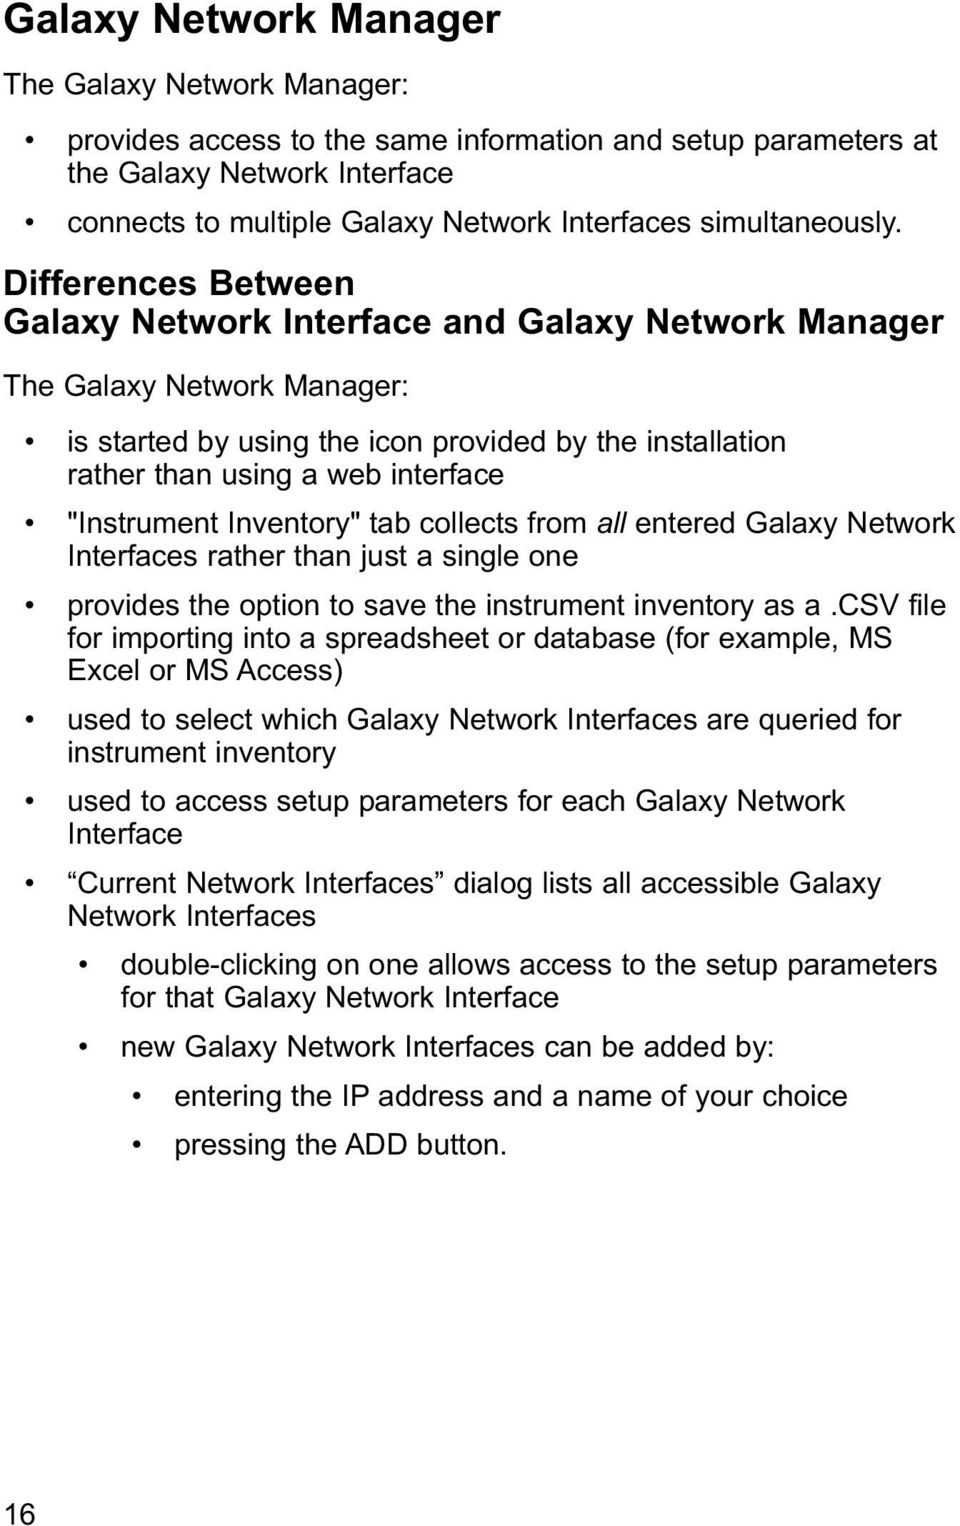 Differences Between Galaxy Network Interface and Galaxy Network Manager The Galaxy Network Manager: is started by using the icon provided by the installation rather than using a web interface